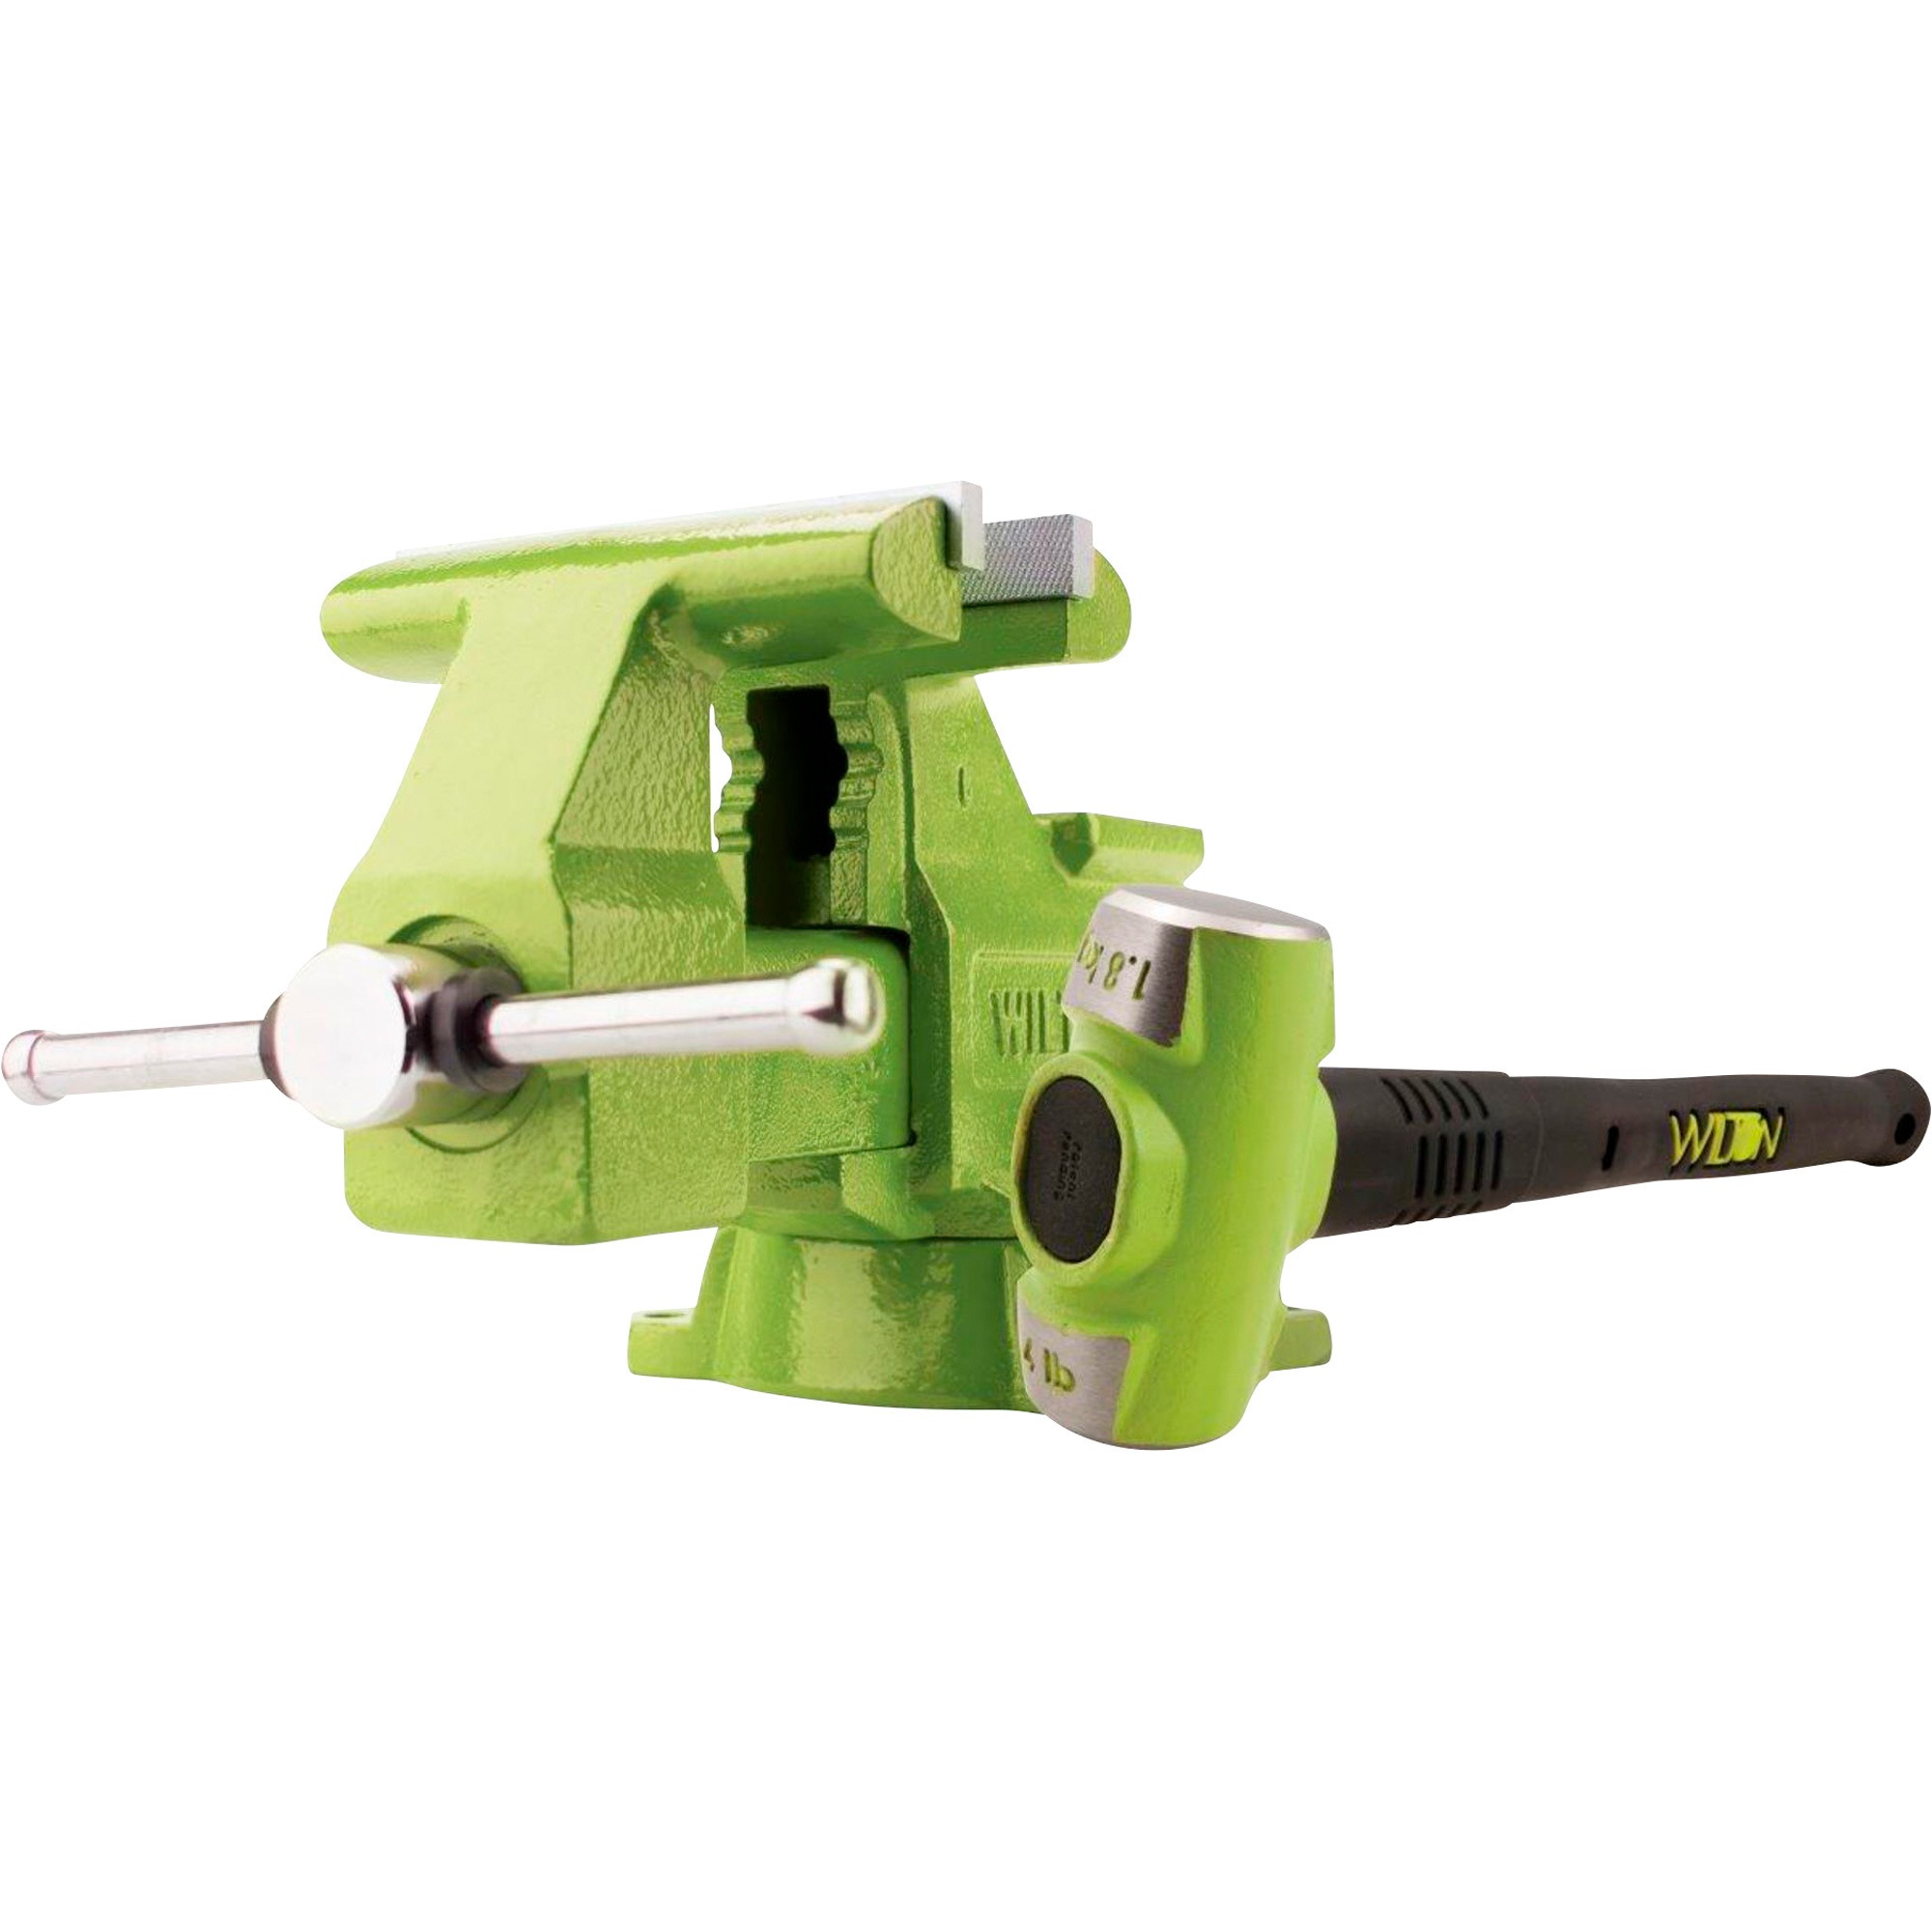 Wilton B.A.S.H. Utility Vise and Hammer Combo, 6.5Inch 180Â° Swivel Vise, 4-Lb. Hammer, Model 11128BH